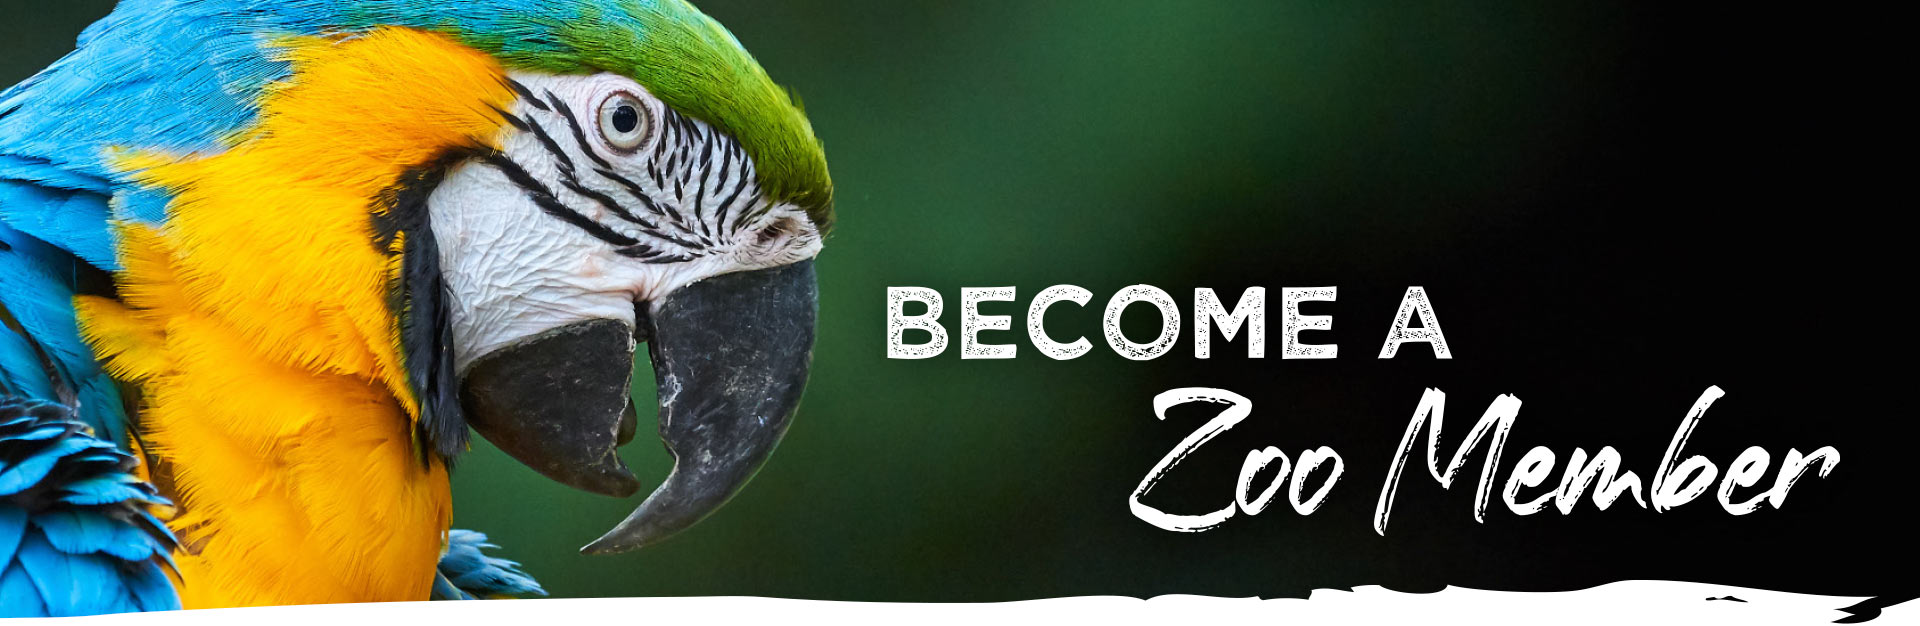 BECOME A ZOO MEMBER